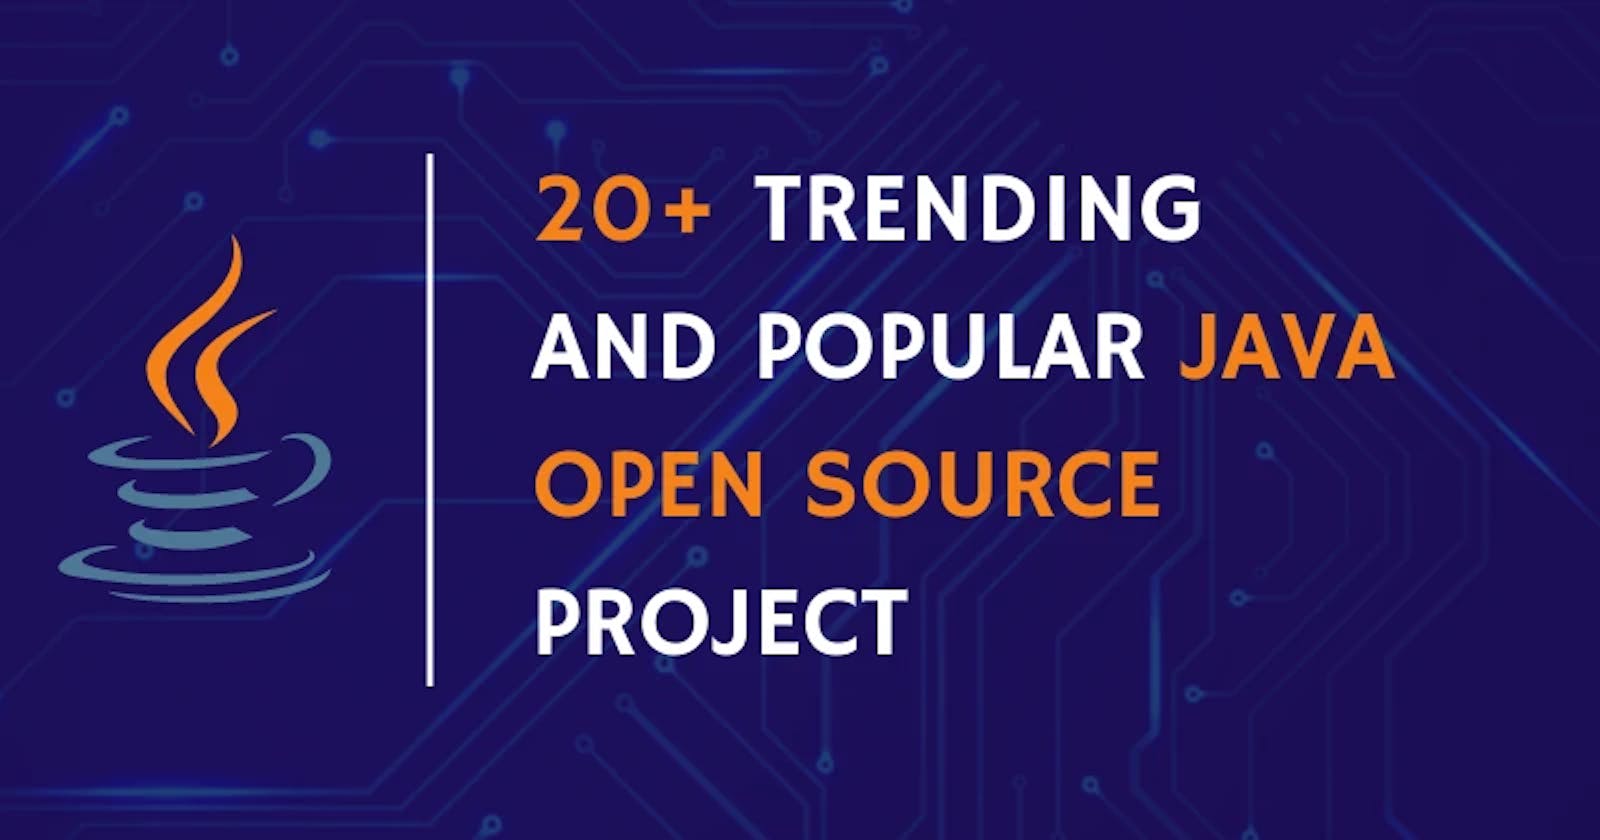 20+ Trending and Popular Java Open Source Project